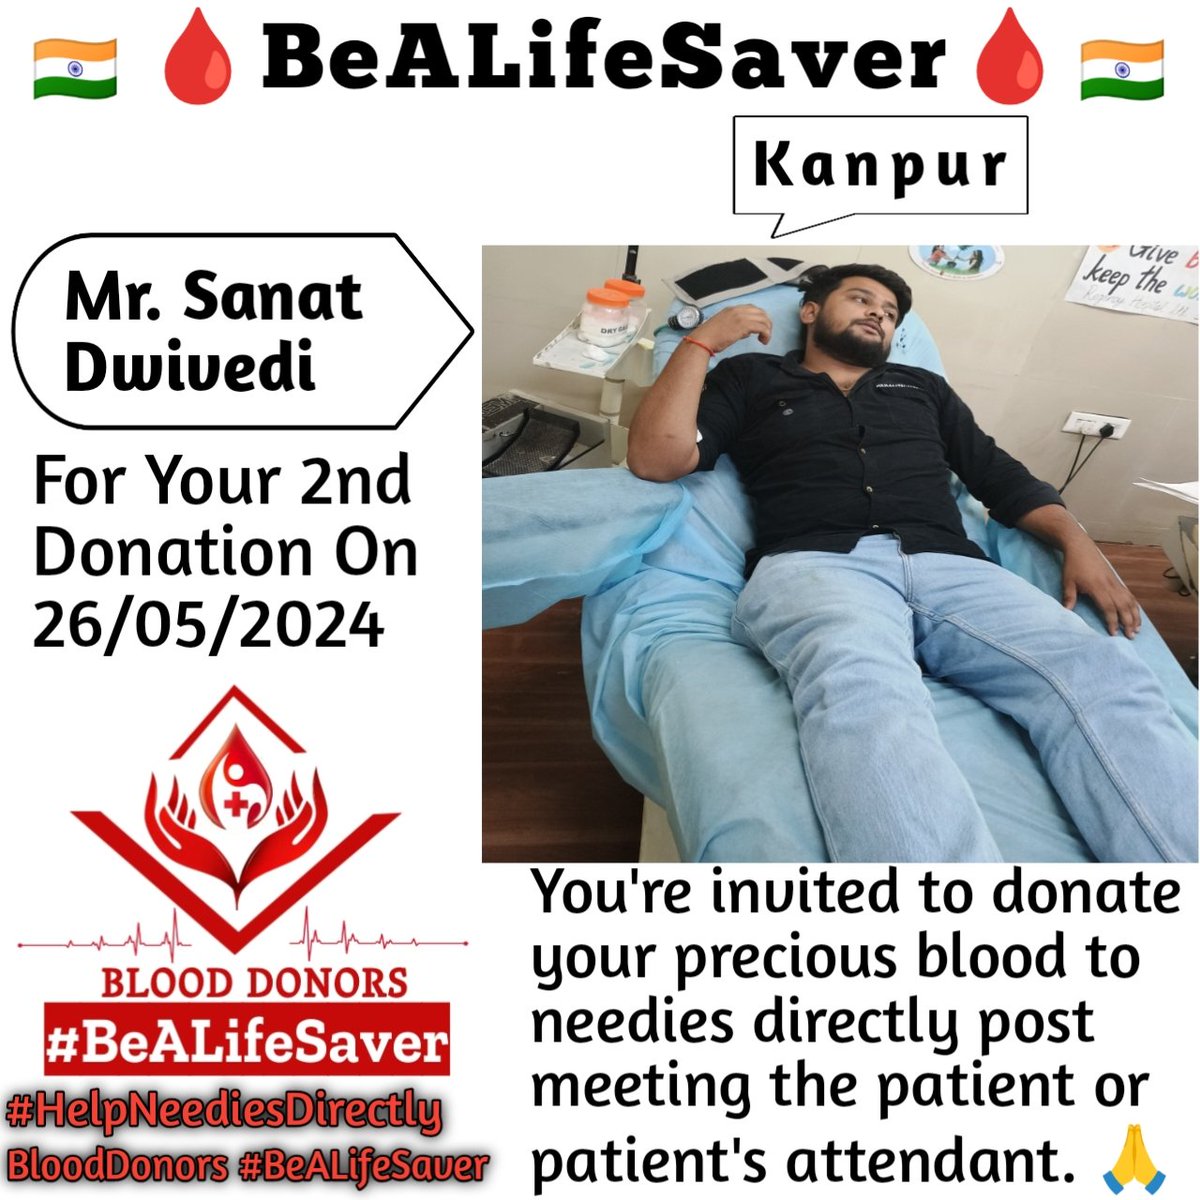 🙏 Congrats To Mr. Sanat Dwivedi Ji For His 2nd Blood Donation 🙏 #HelpNeediesDirectly #BeALifeSaver Today's hero, Mr. Sanat Dwivedi Ji, donated blood in Kanpur for the 2nd time to help a patient in need. Heartfelt gratitude and respect for his selfless act.